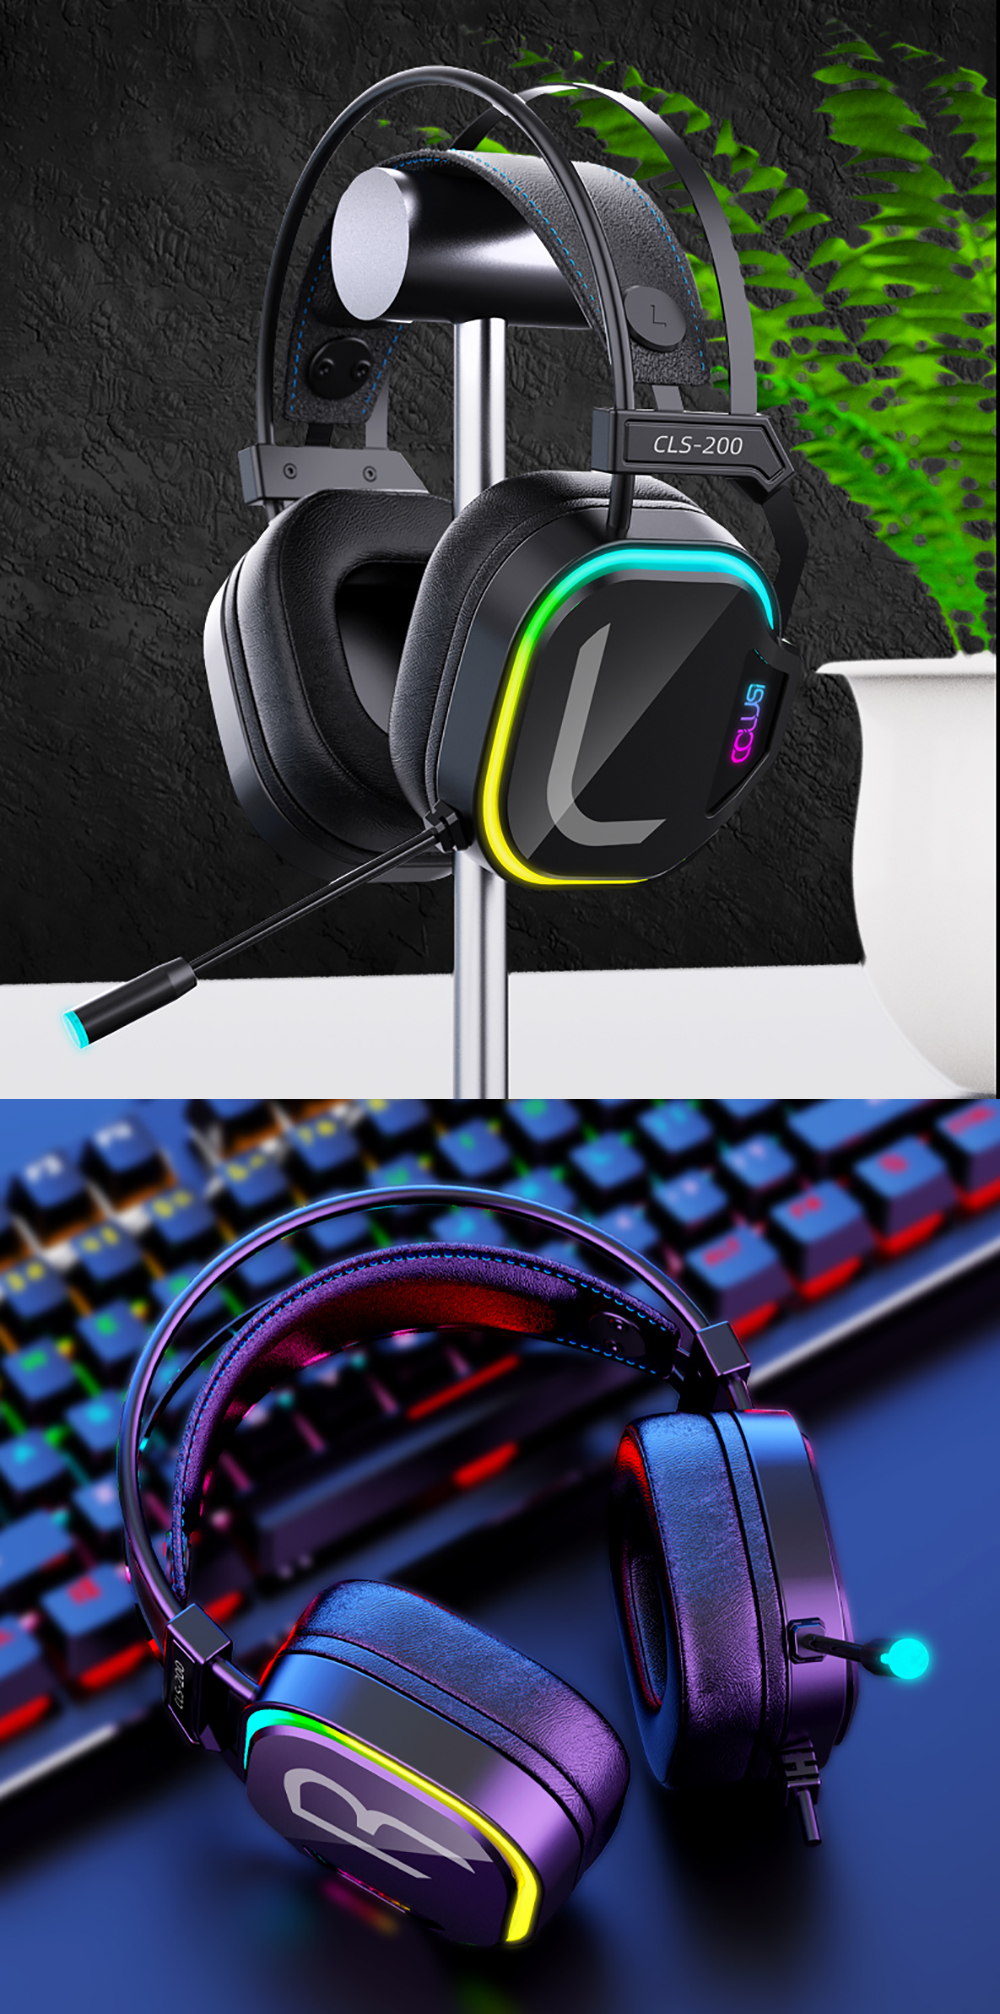 YC-CLS-200-Gaming-Headset-with-Omnidirectional-Microphone-Colorful-RGB-Light-50mm-Unit-for-PC-Laptop-1909361-11